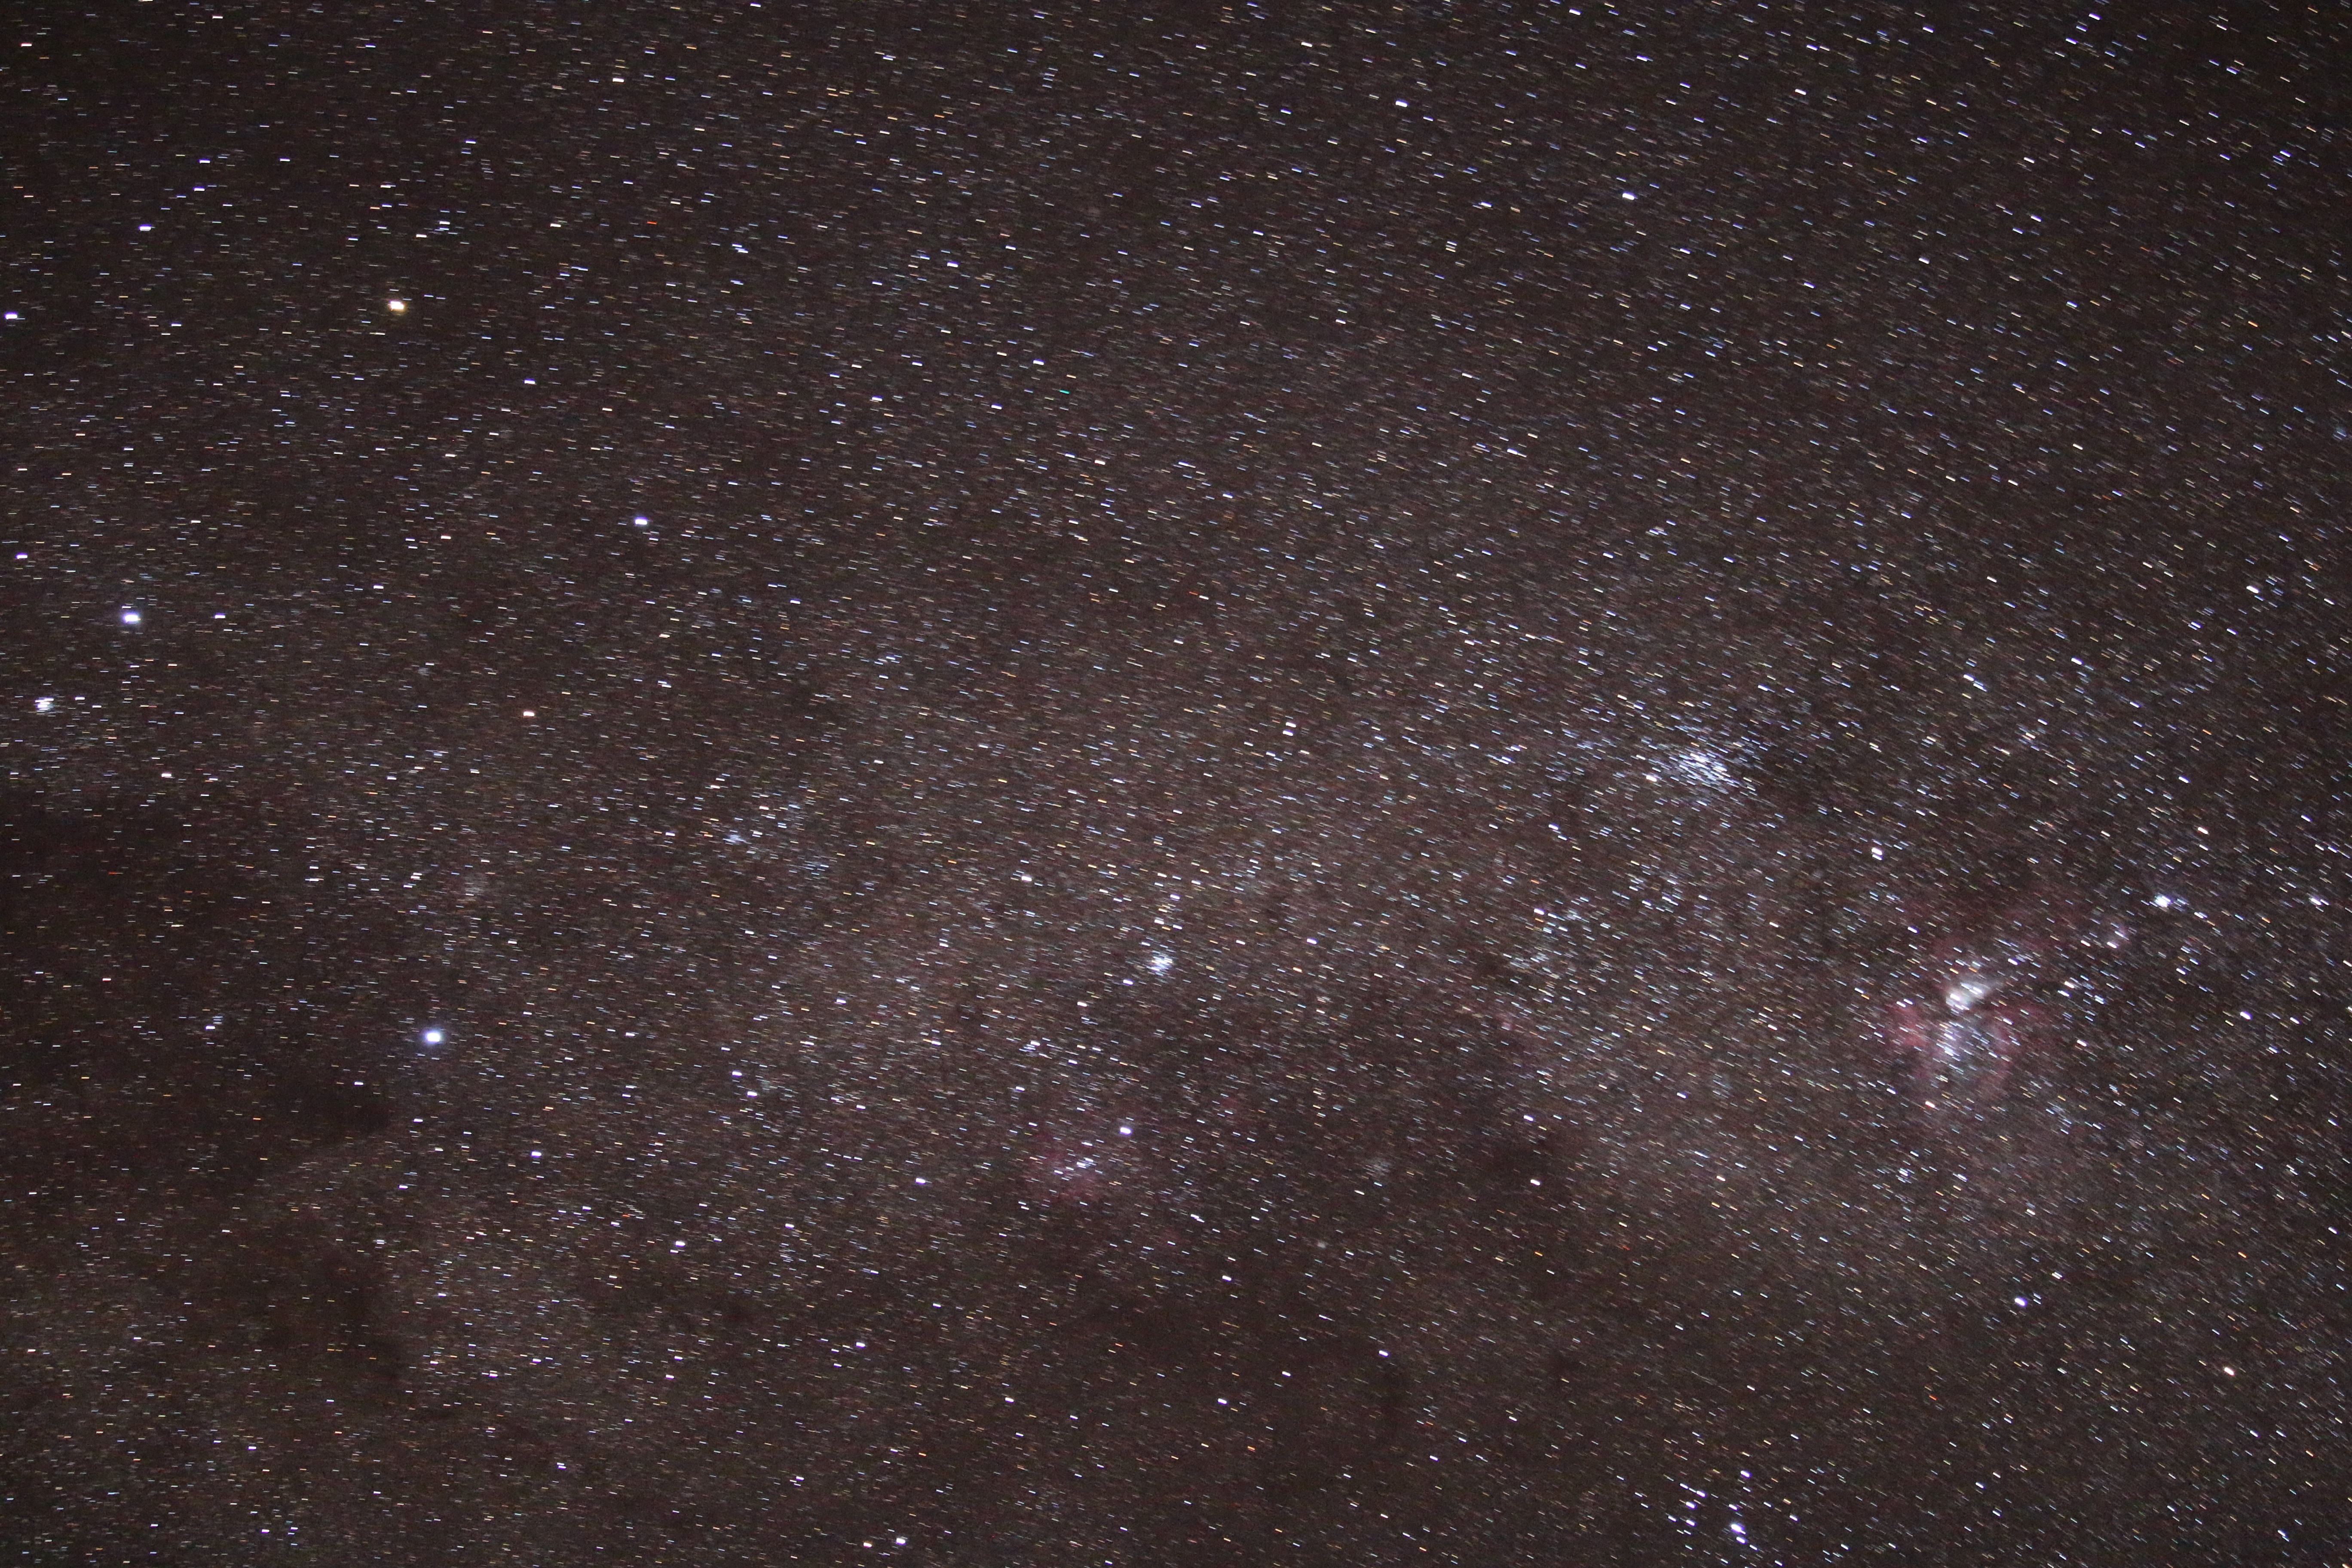 The stars were amazing, I think I captured the Southern Cross. 